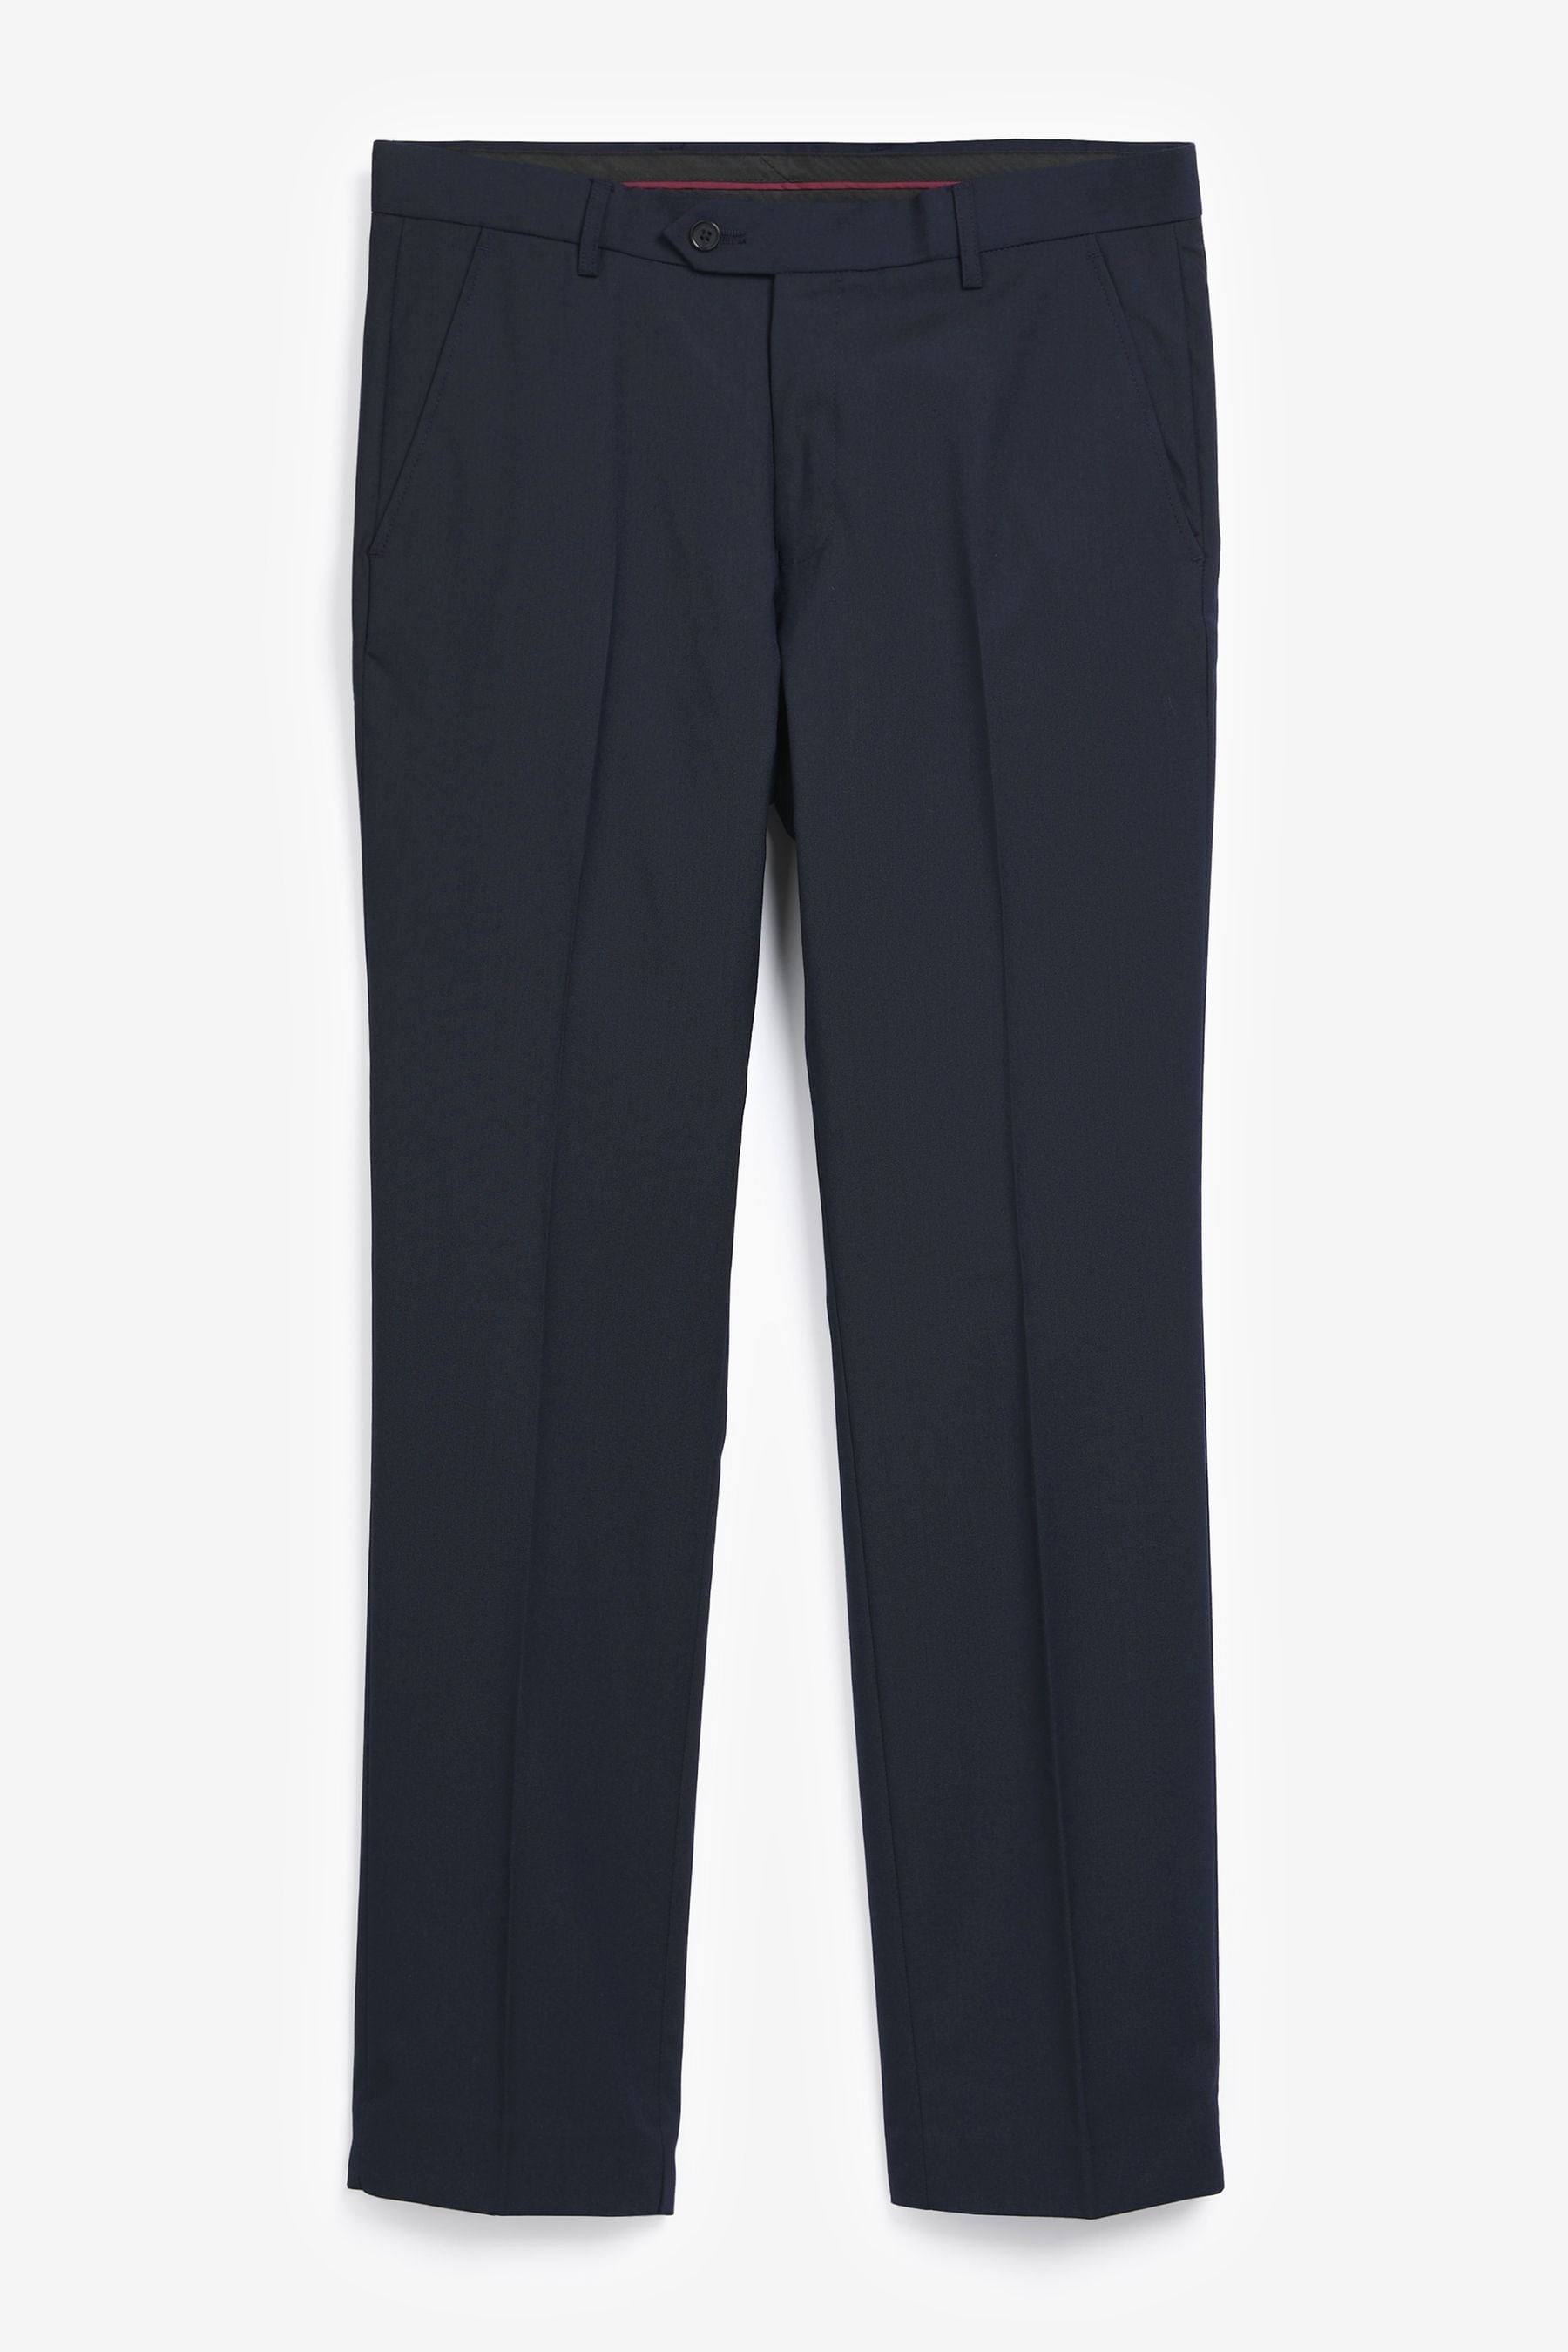 Buy Navy Blue Tailored Stretch Smart Trousers from the Next UK online shop